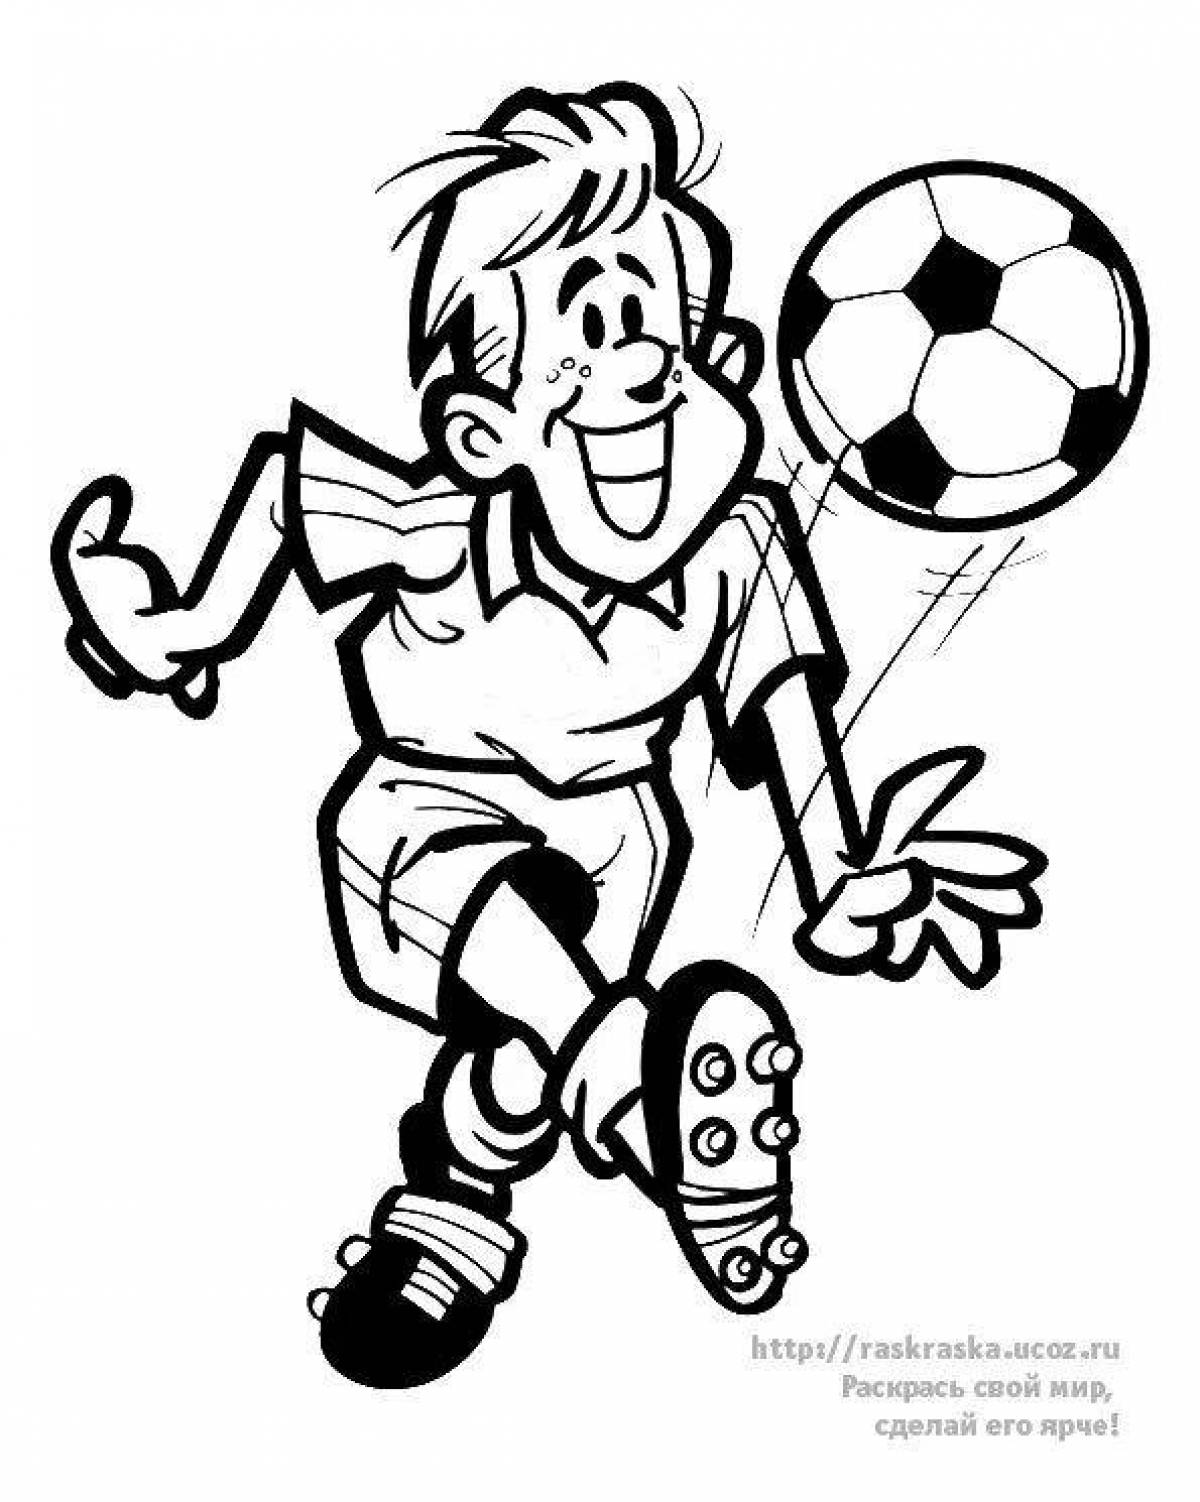 Confident soccer player with ball